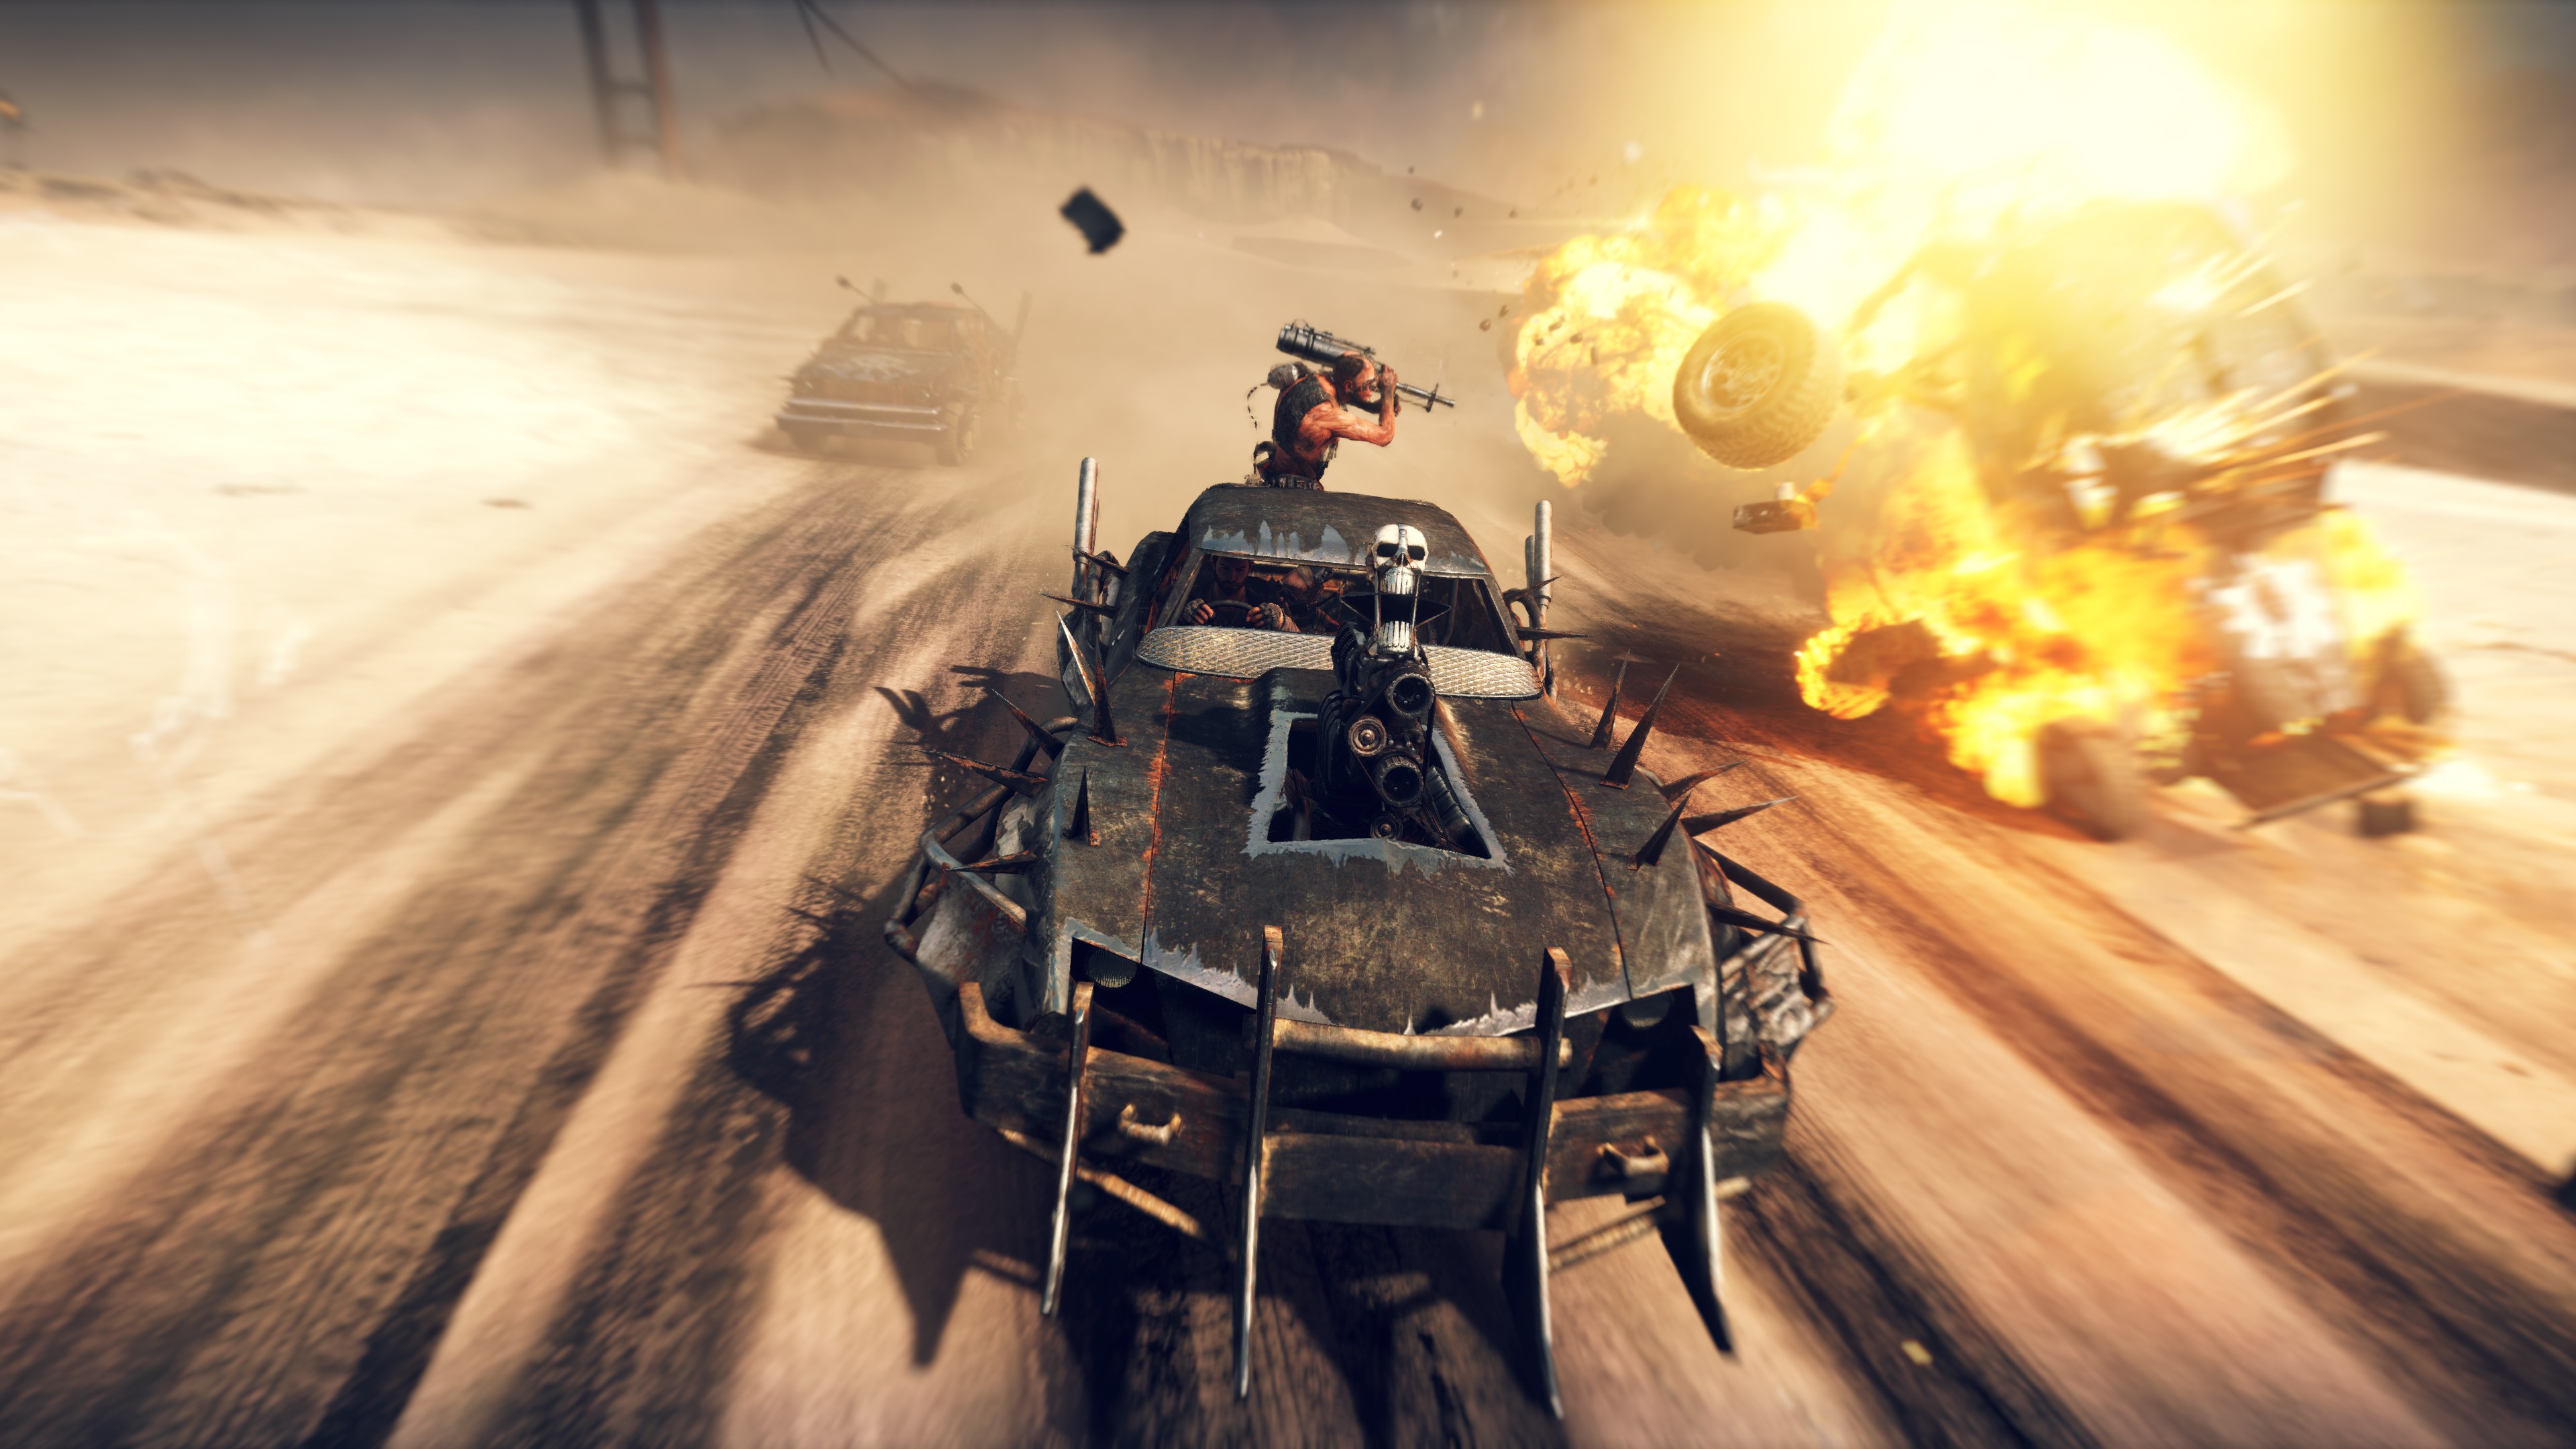 Discover 85+ mad max wallpaper - in.cdgdbentre